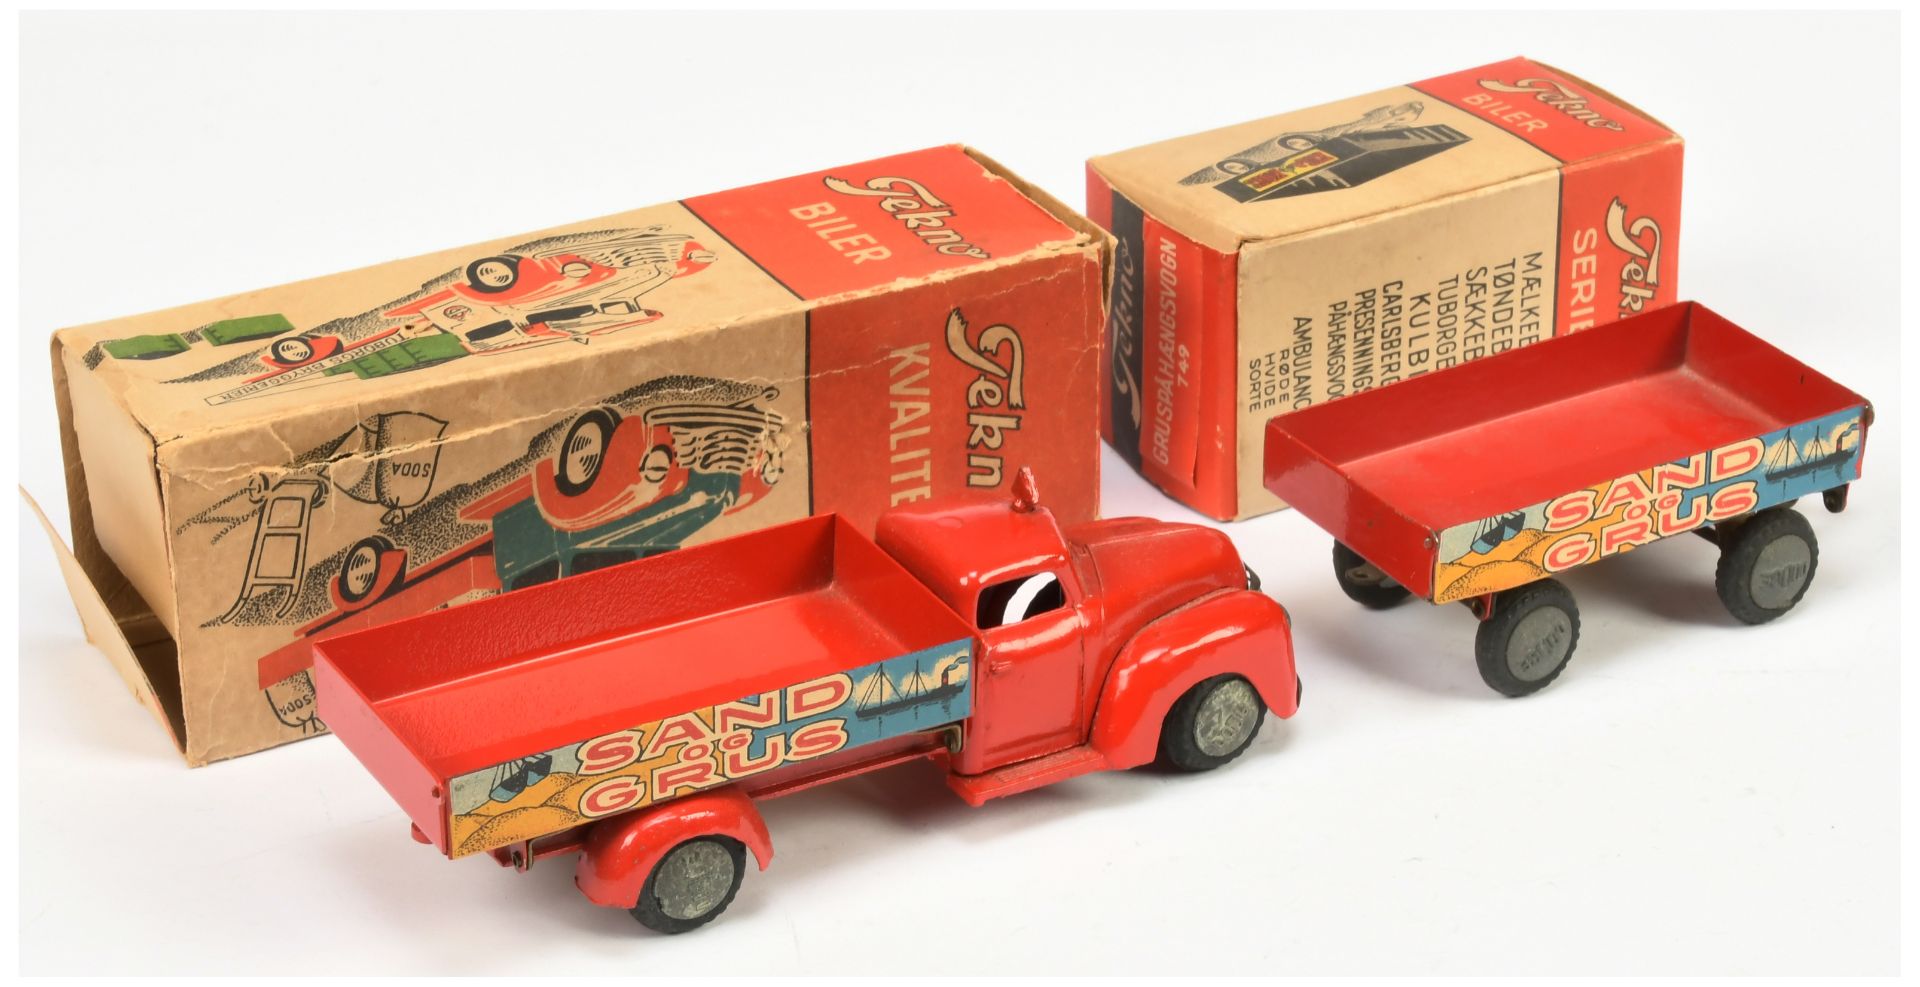 Tekno 750 Dodge "Sand & Gravel"  Delivery Truck - Red including back, chrome trim with 749 Matchi... - Image 2 of 2